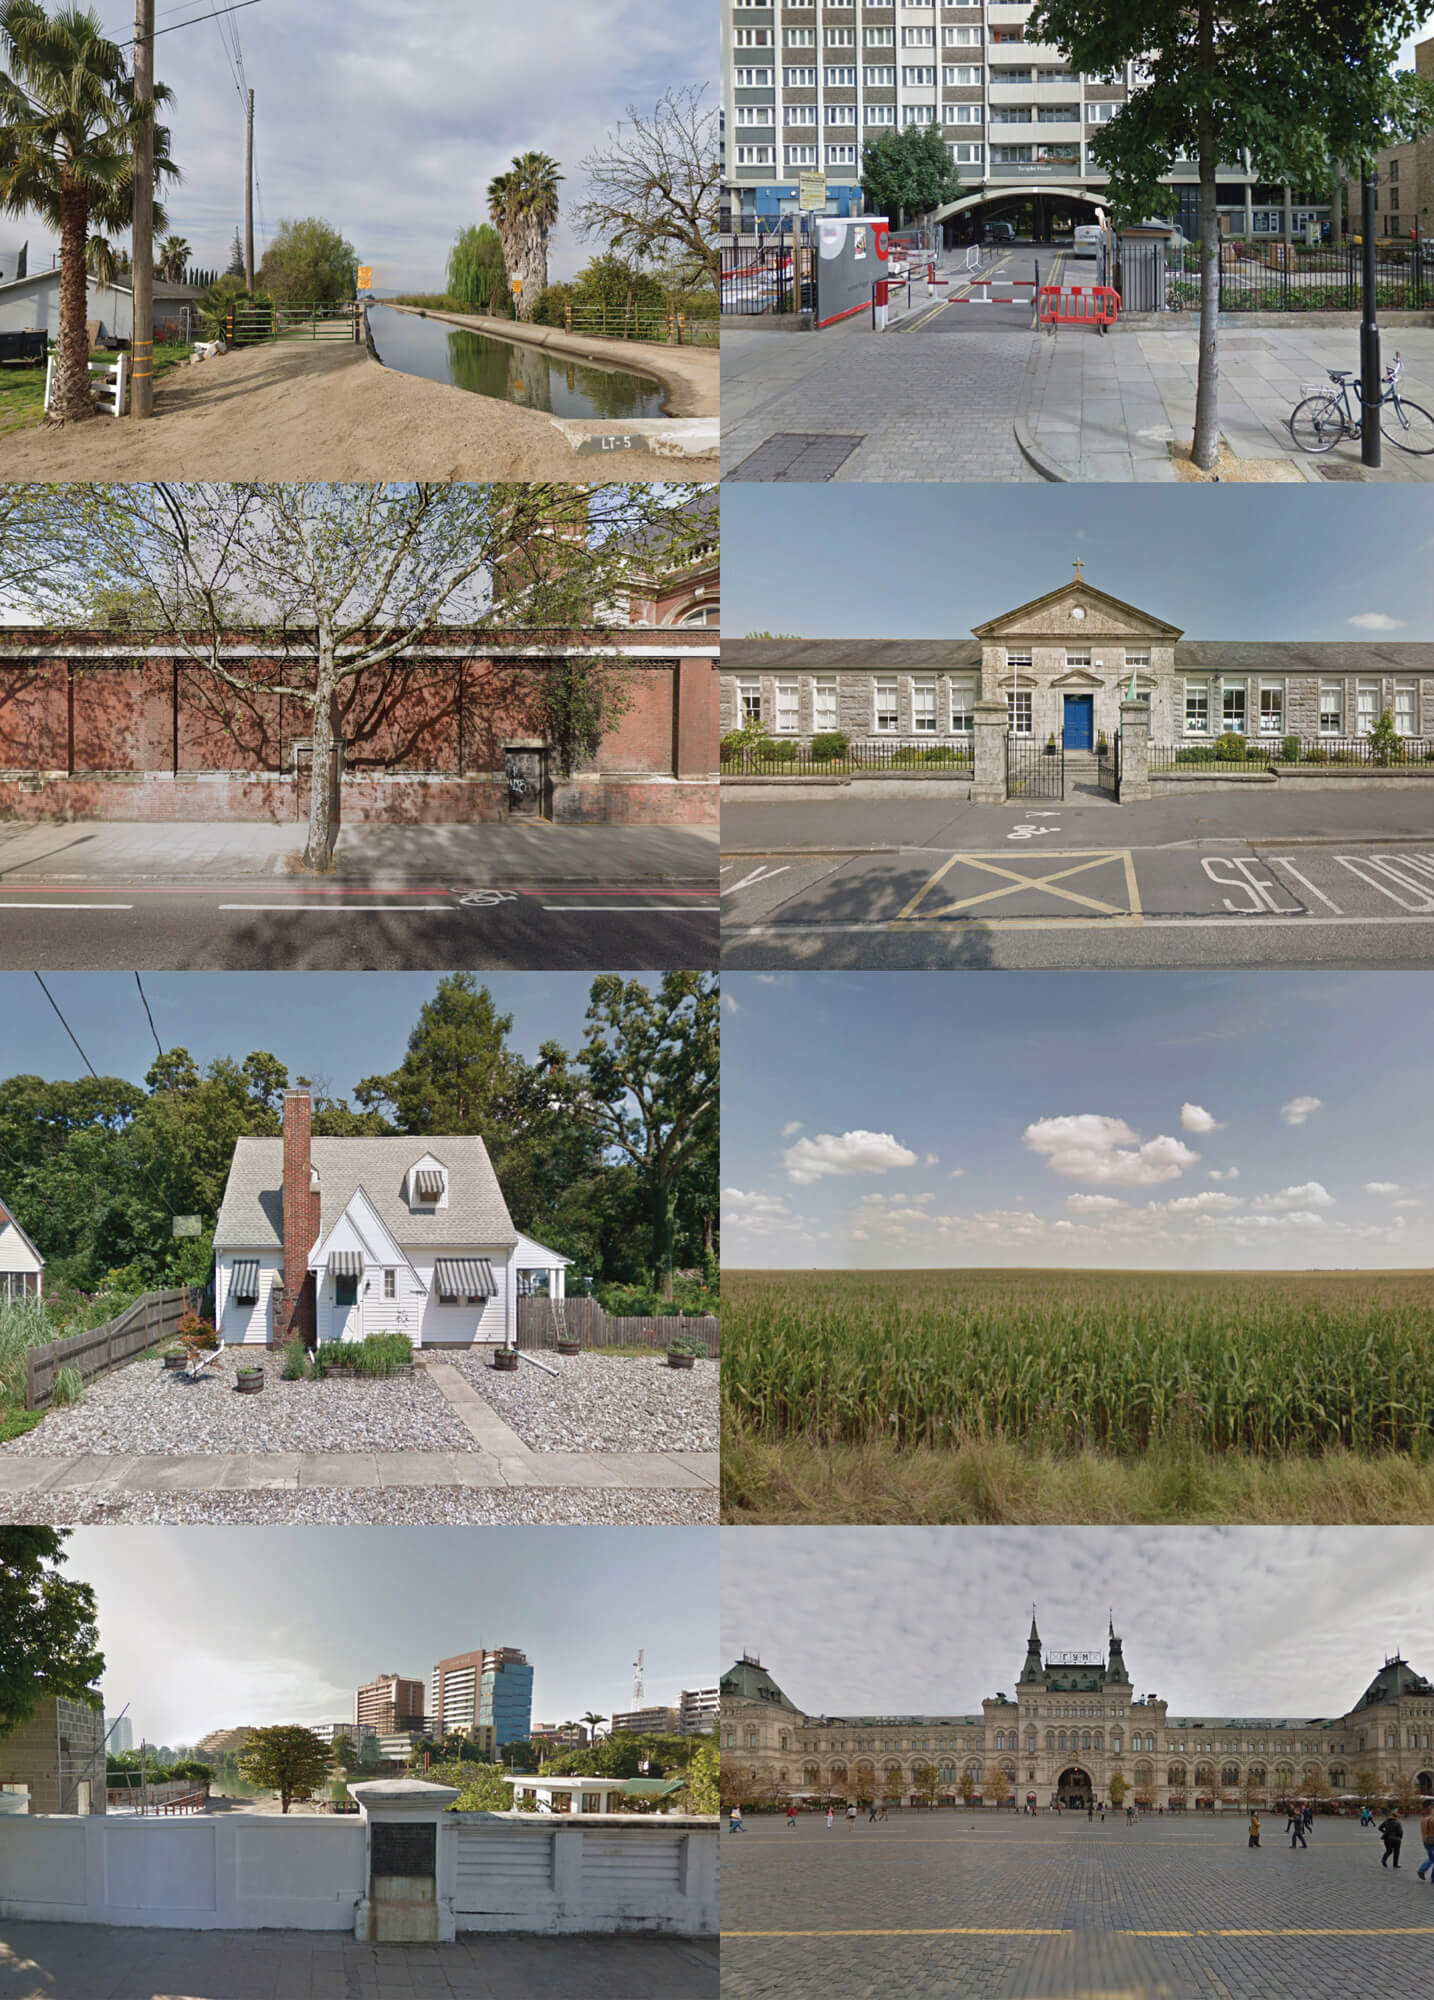 Possible locations of Iron March users found on Google Street View by tracking IP addresses in the leak the south west collective of photography